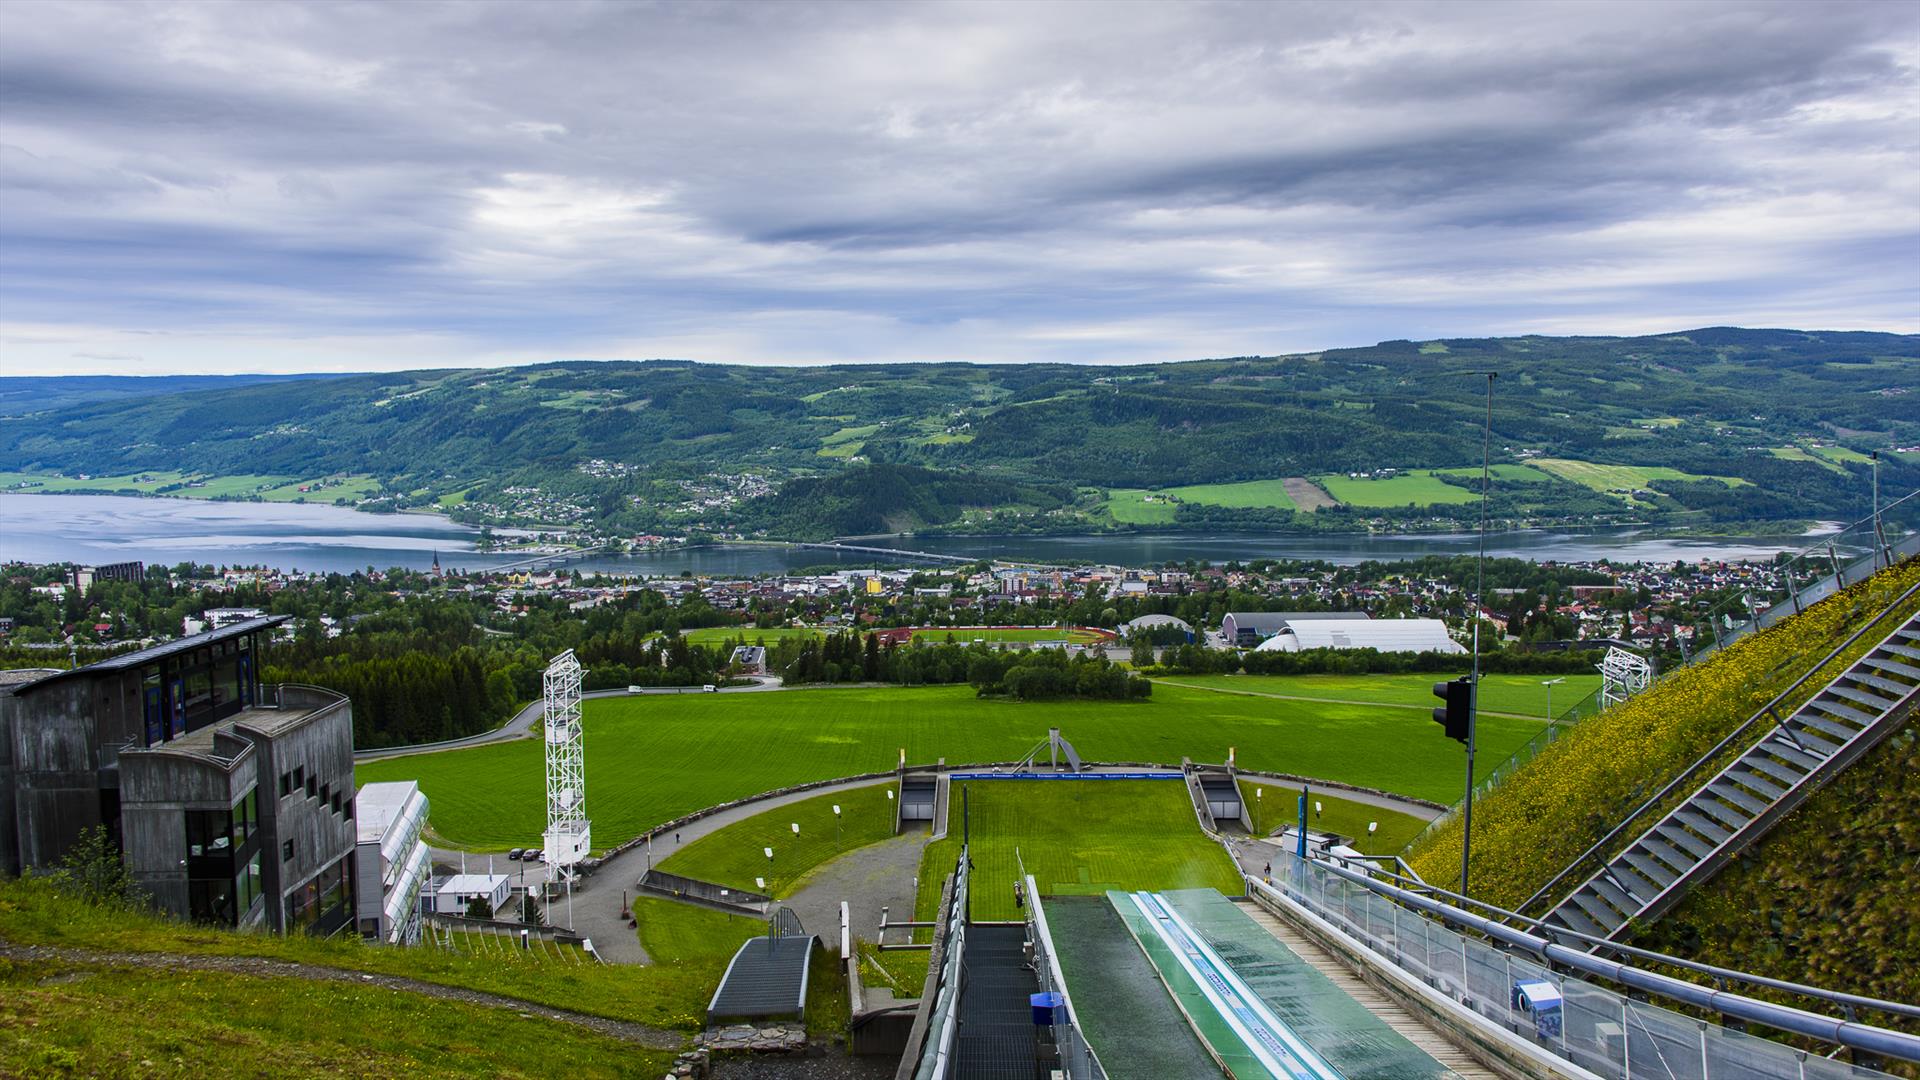 View towards Lillehammer from the top of the jumping hill